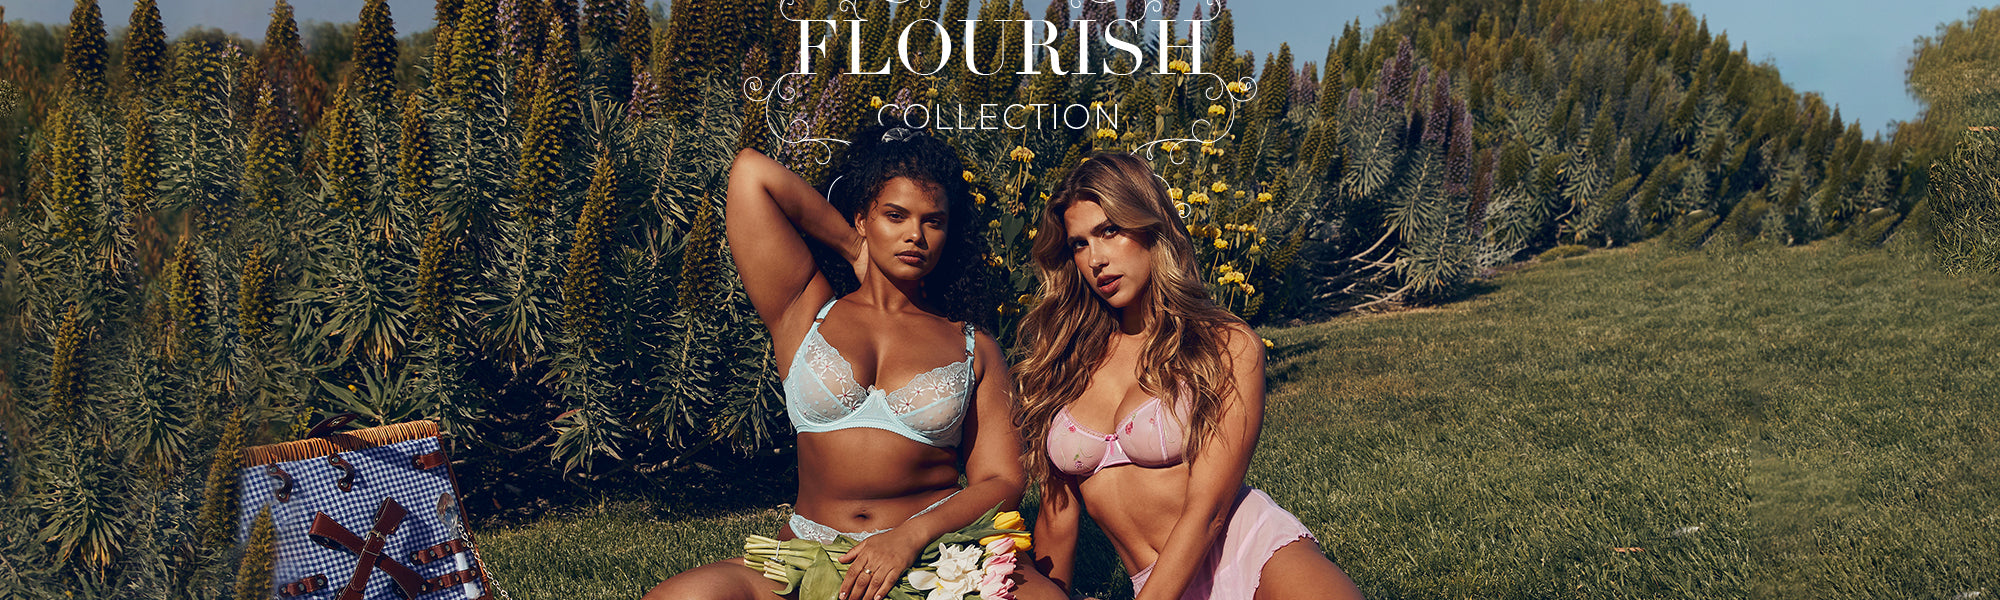 The Flourish Collection – Coming Soon – Lounge Underwear